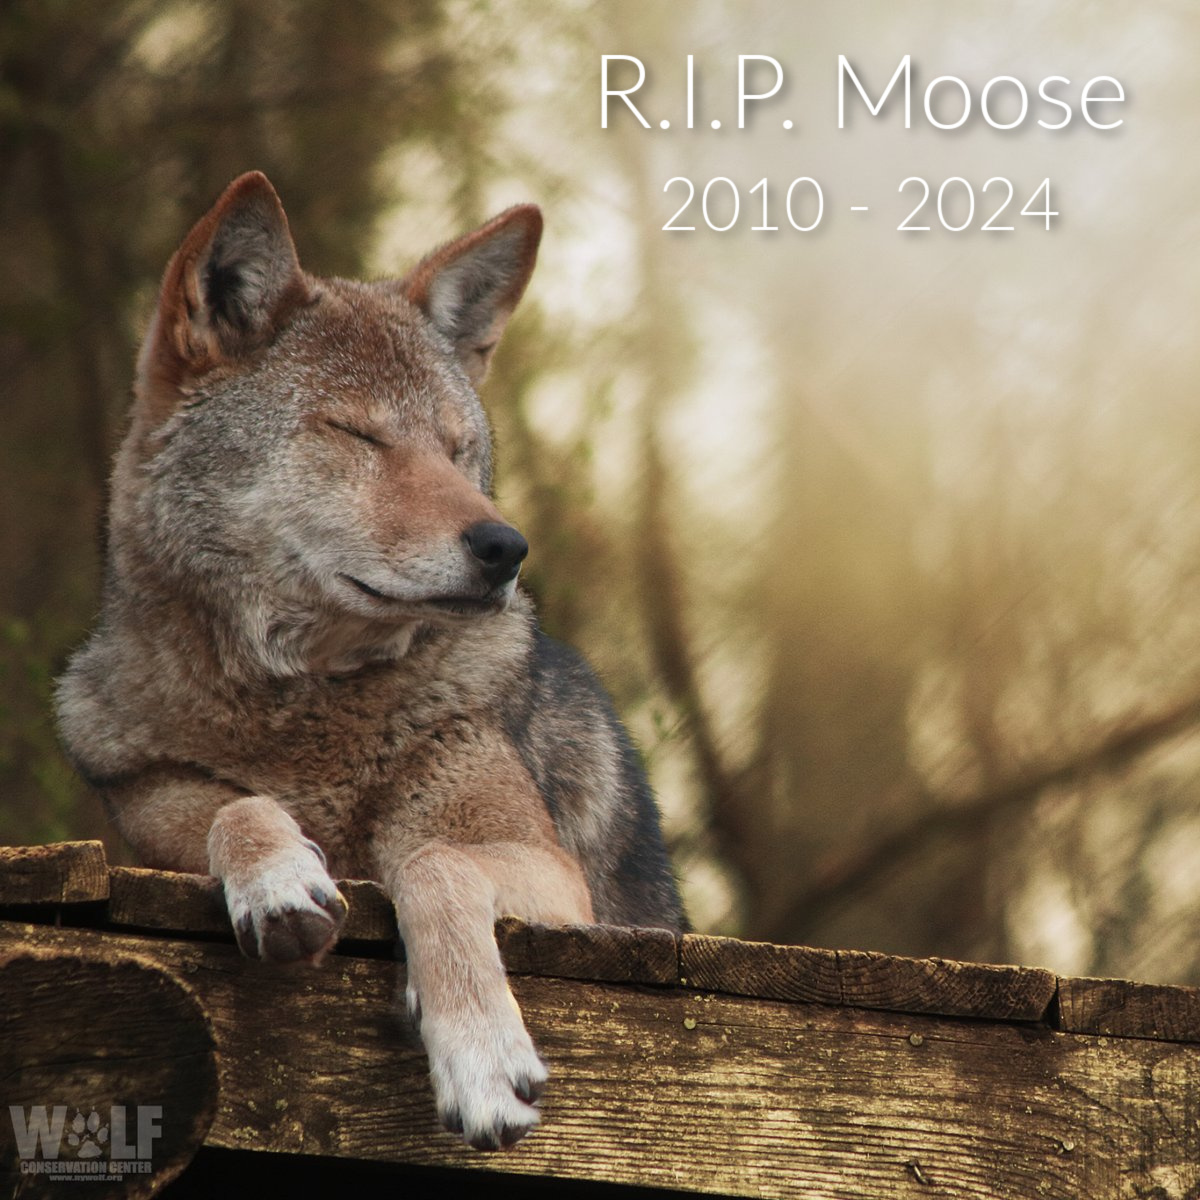 Dear Friends, It's with heavy hearts that we share news of red wolf Moose's passing. Many of you remember the excitement surrounding Moose's birth at the WCC in 2010 + the continued excitement as we watched him grow + mature. RIP, Moose. We hope you're finally running free.